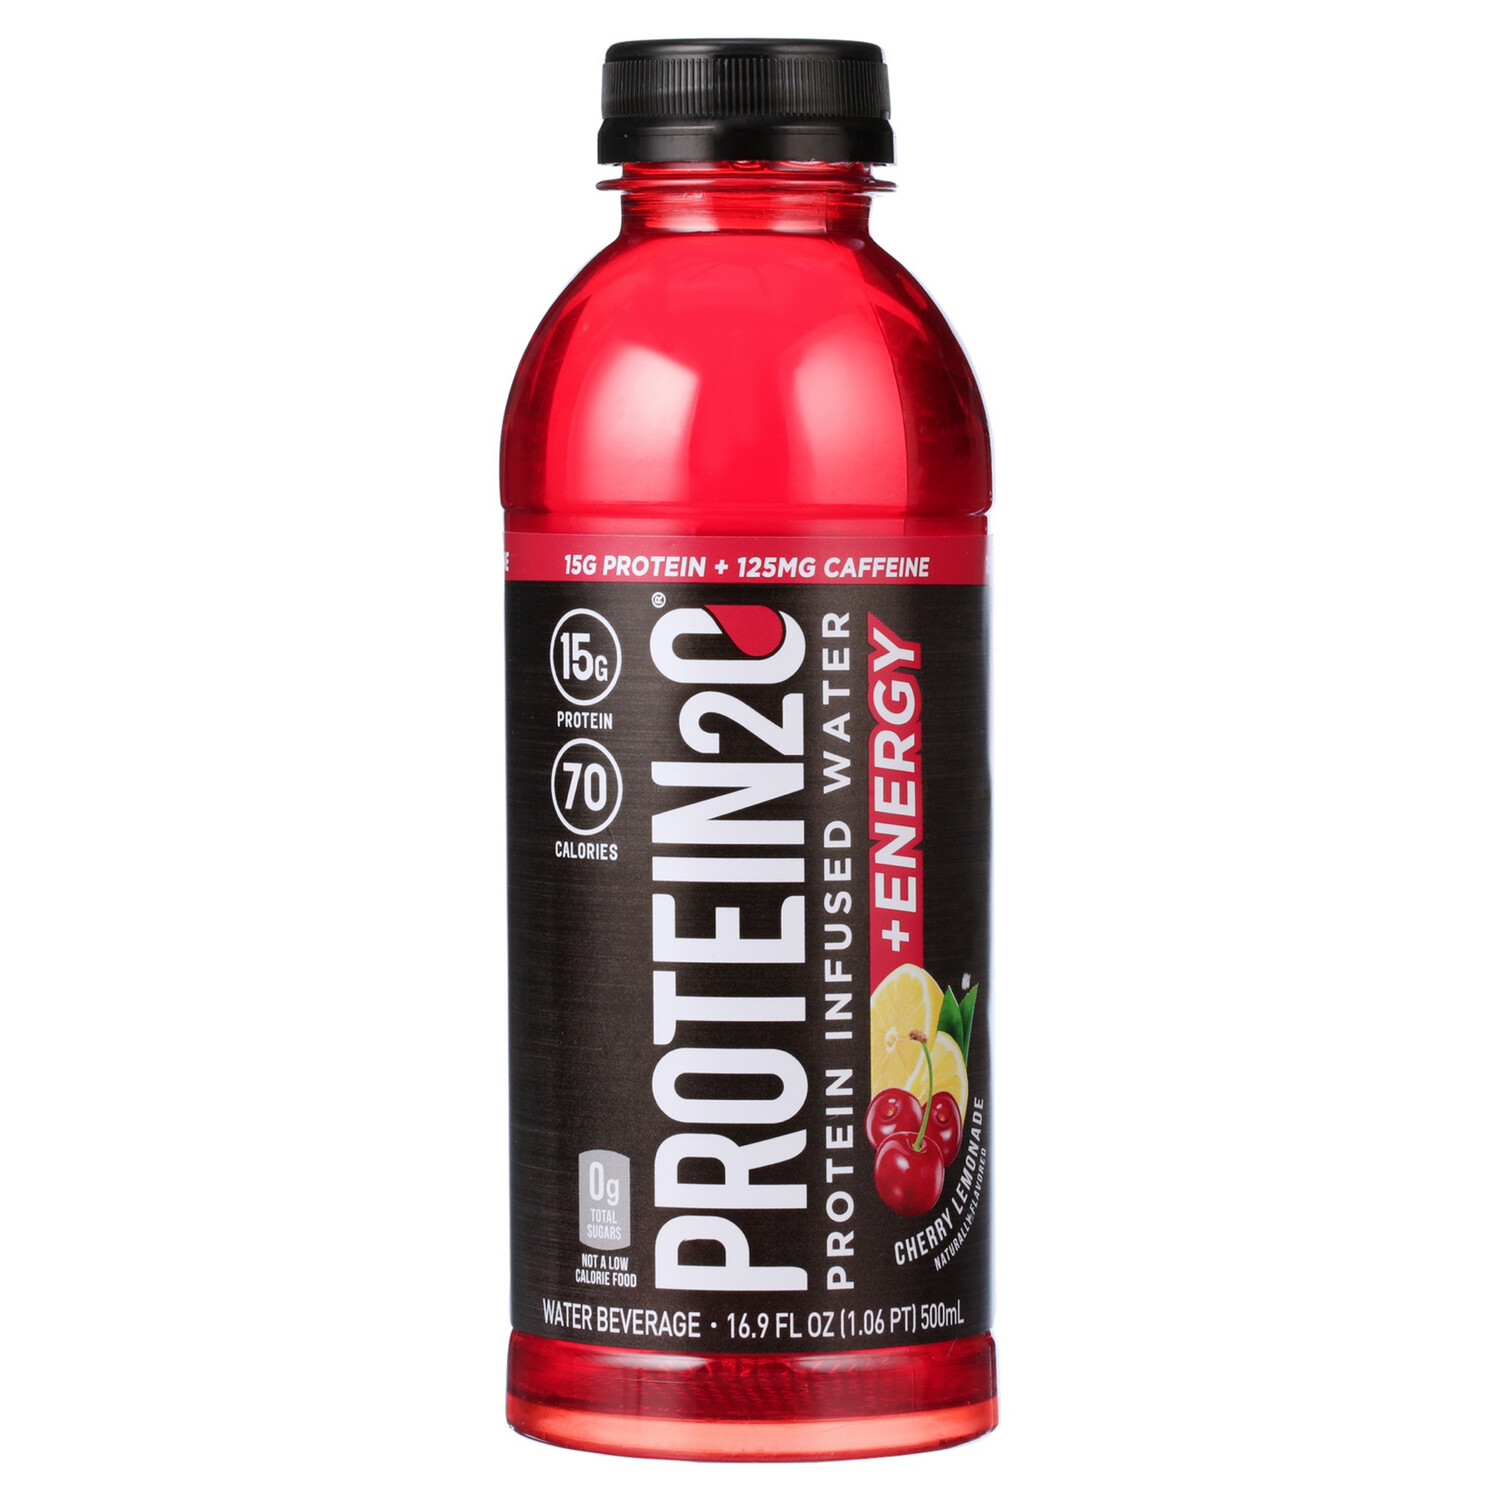 Protein2O Protein Infused Water + Energy Cherry Lemonade 